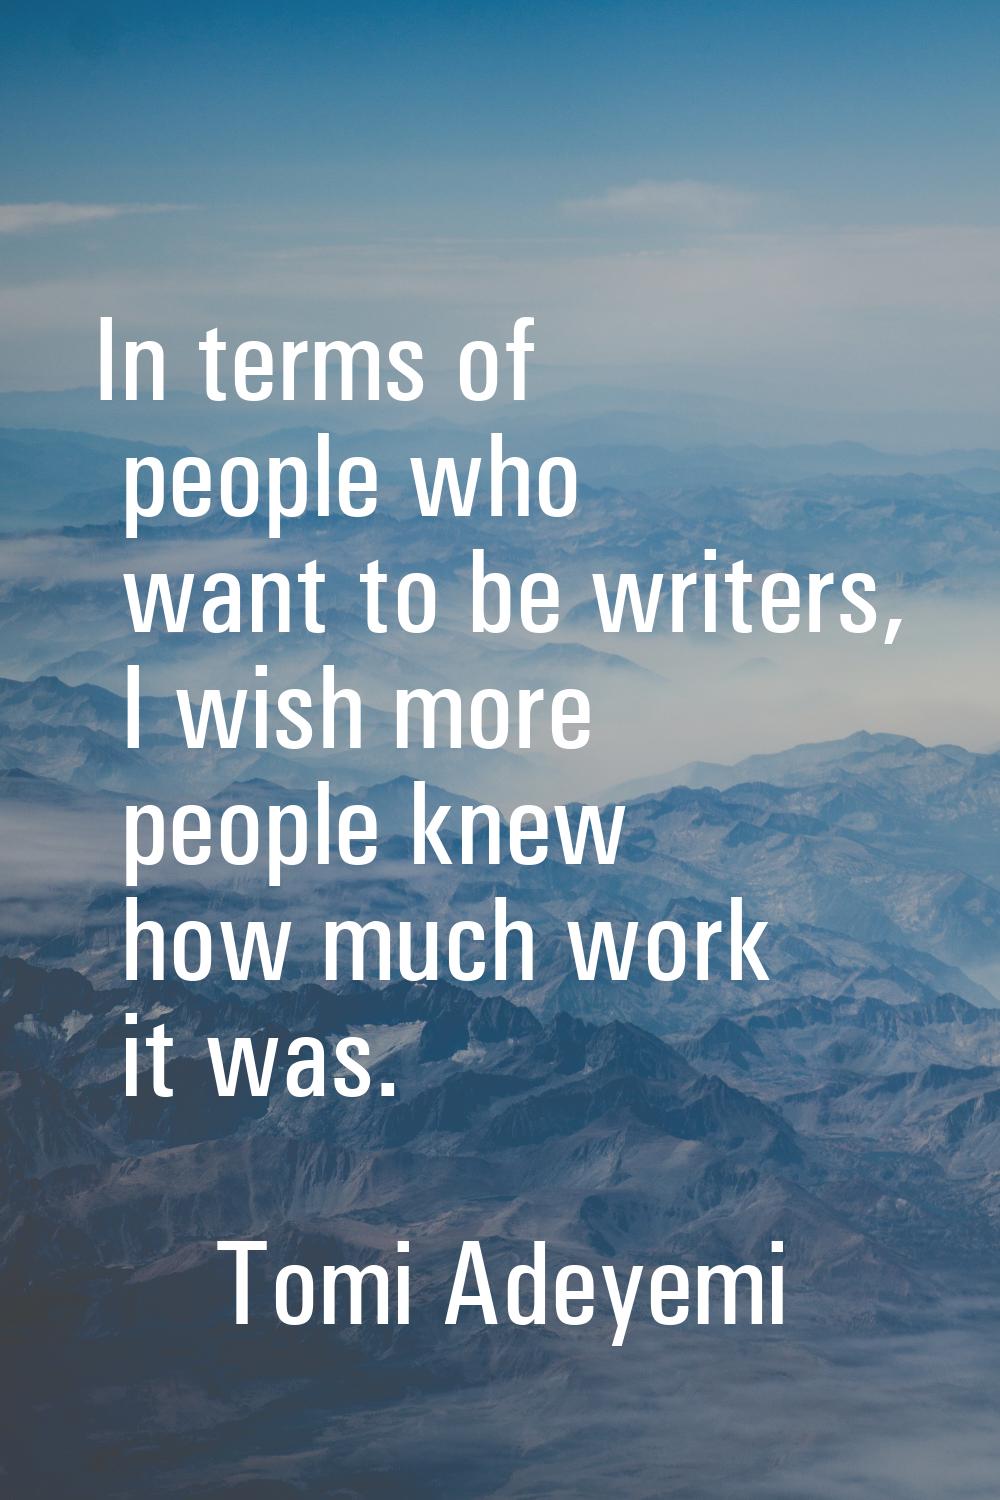 In terms of people who want to be writers, I wish more people knew how much work it was.